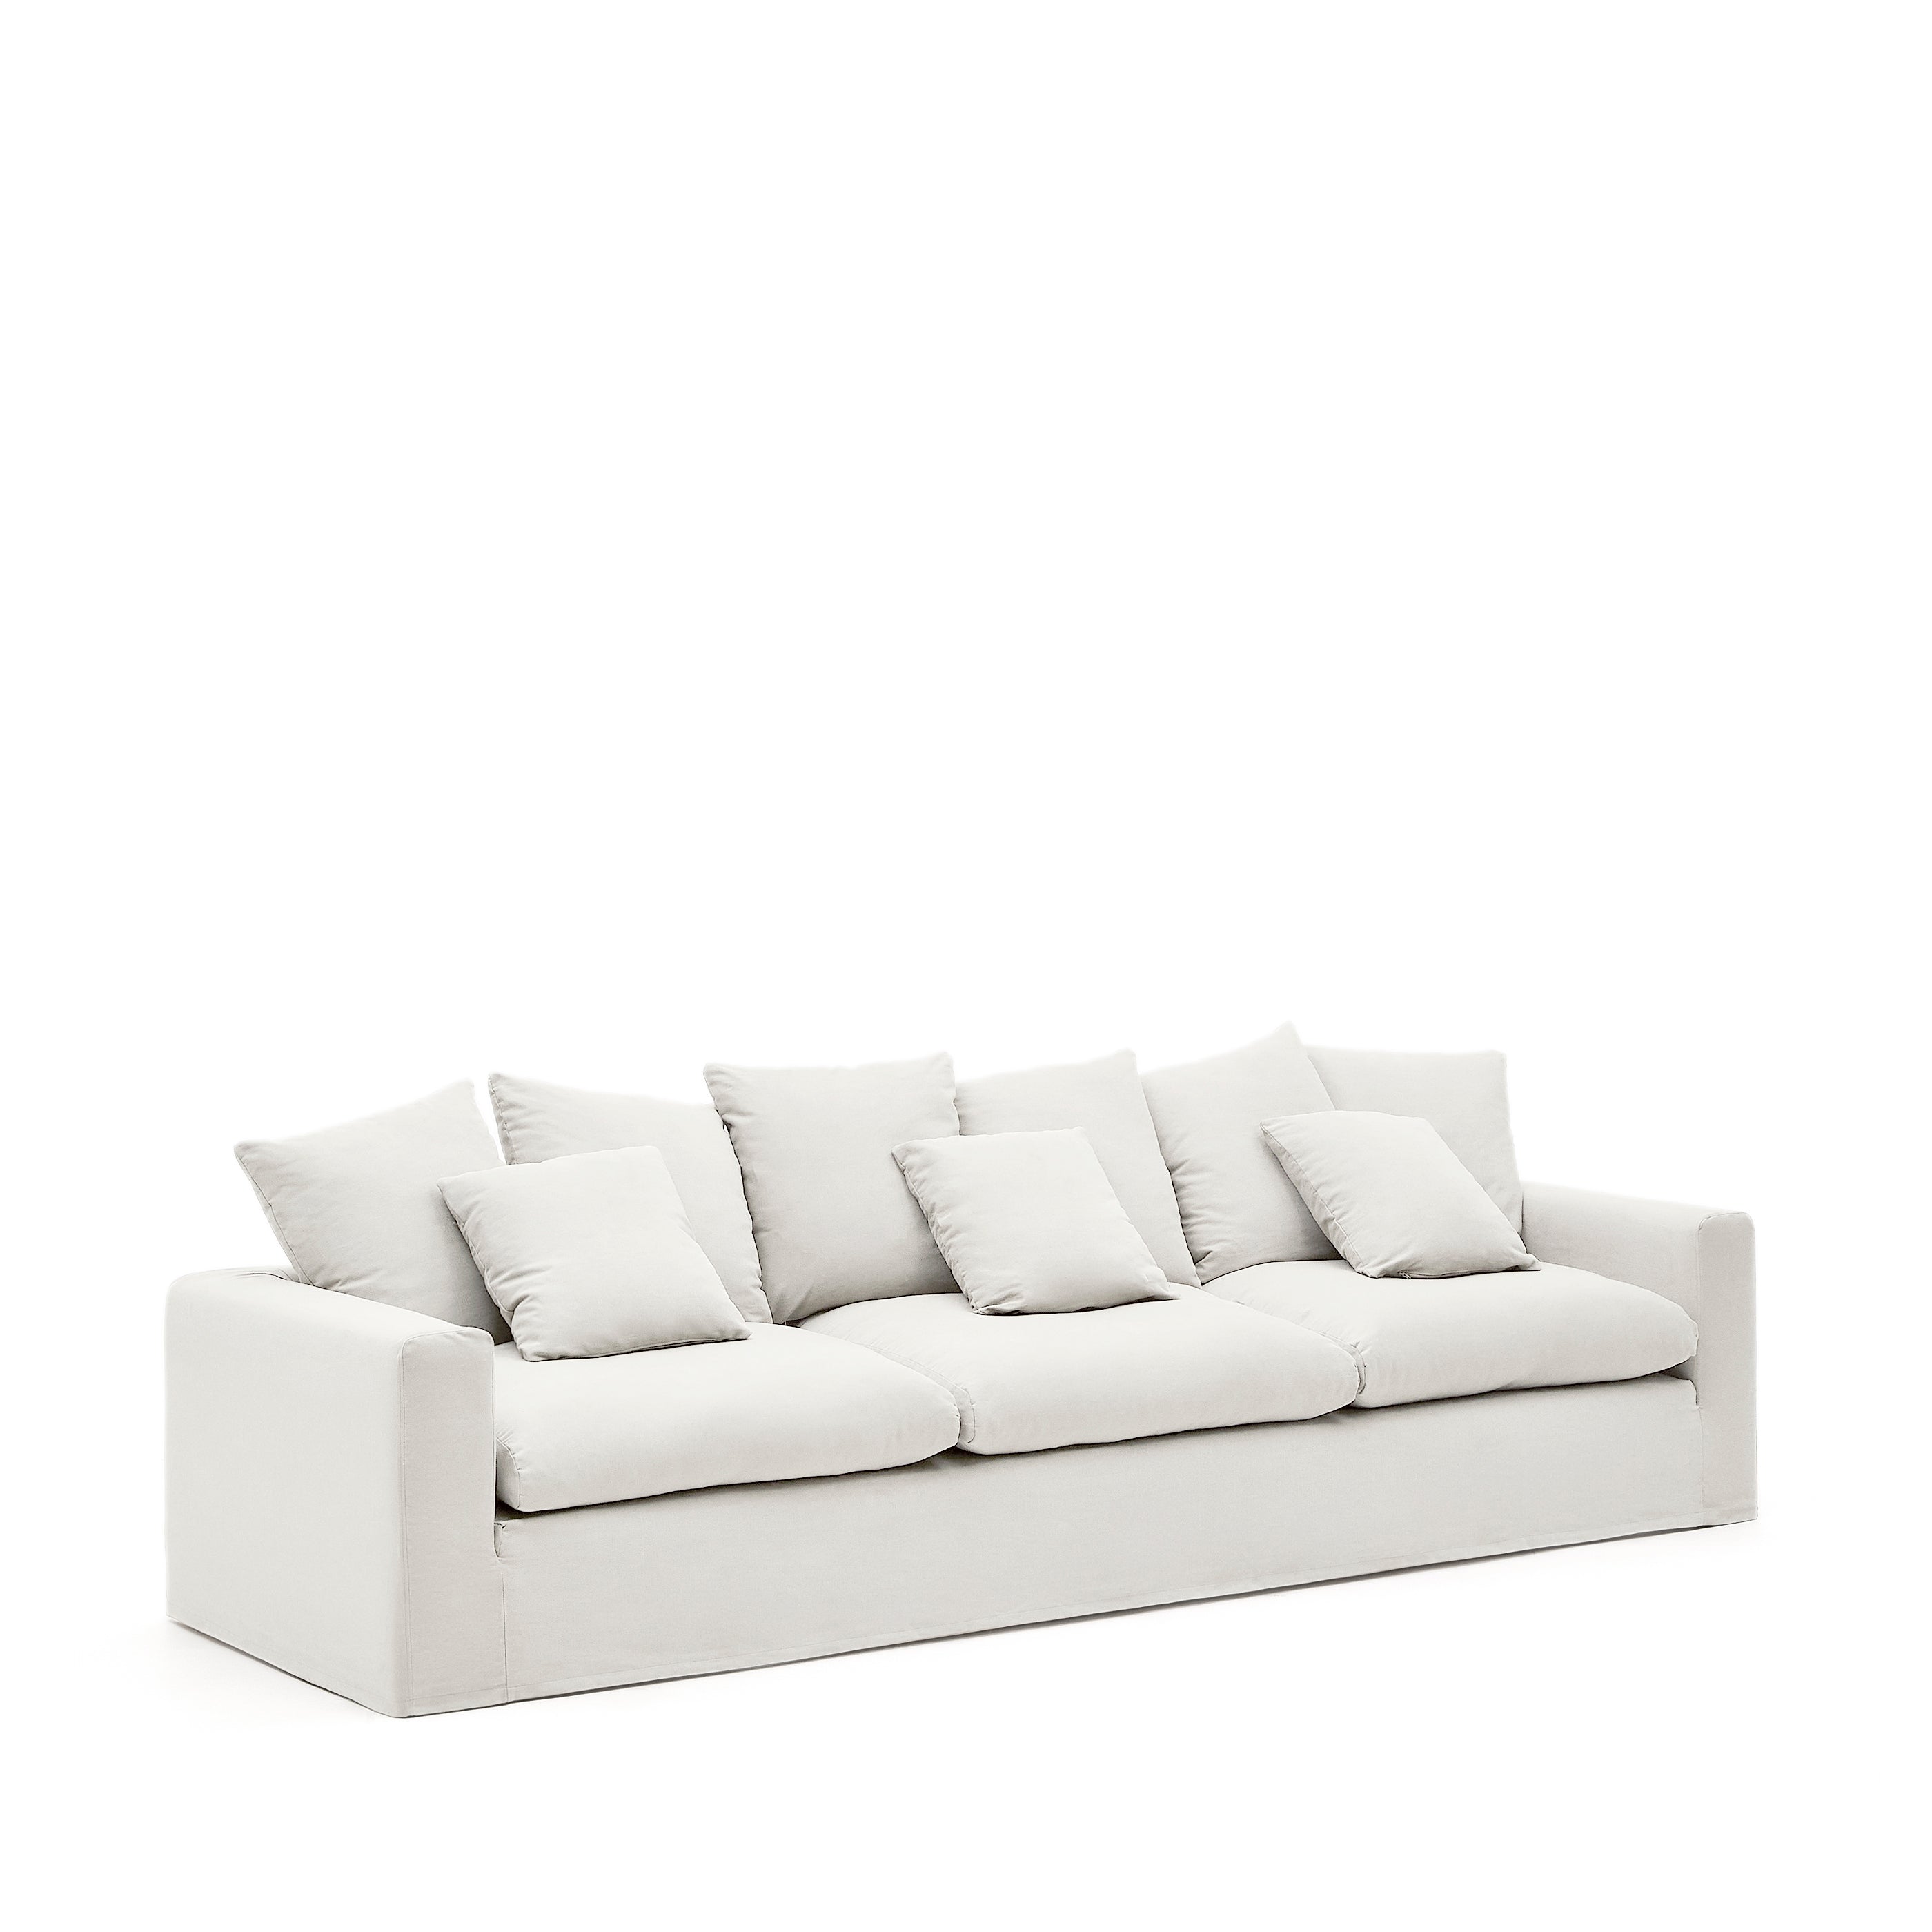 Nora four-seater sofa with removable cover and ecru linen and cotton cushions 340 cm